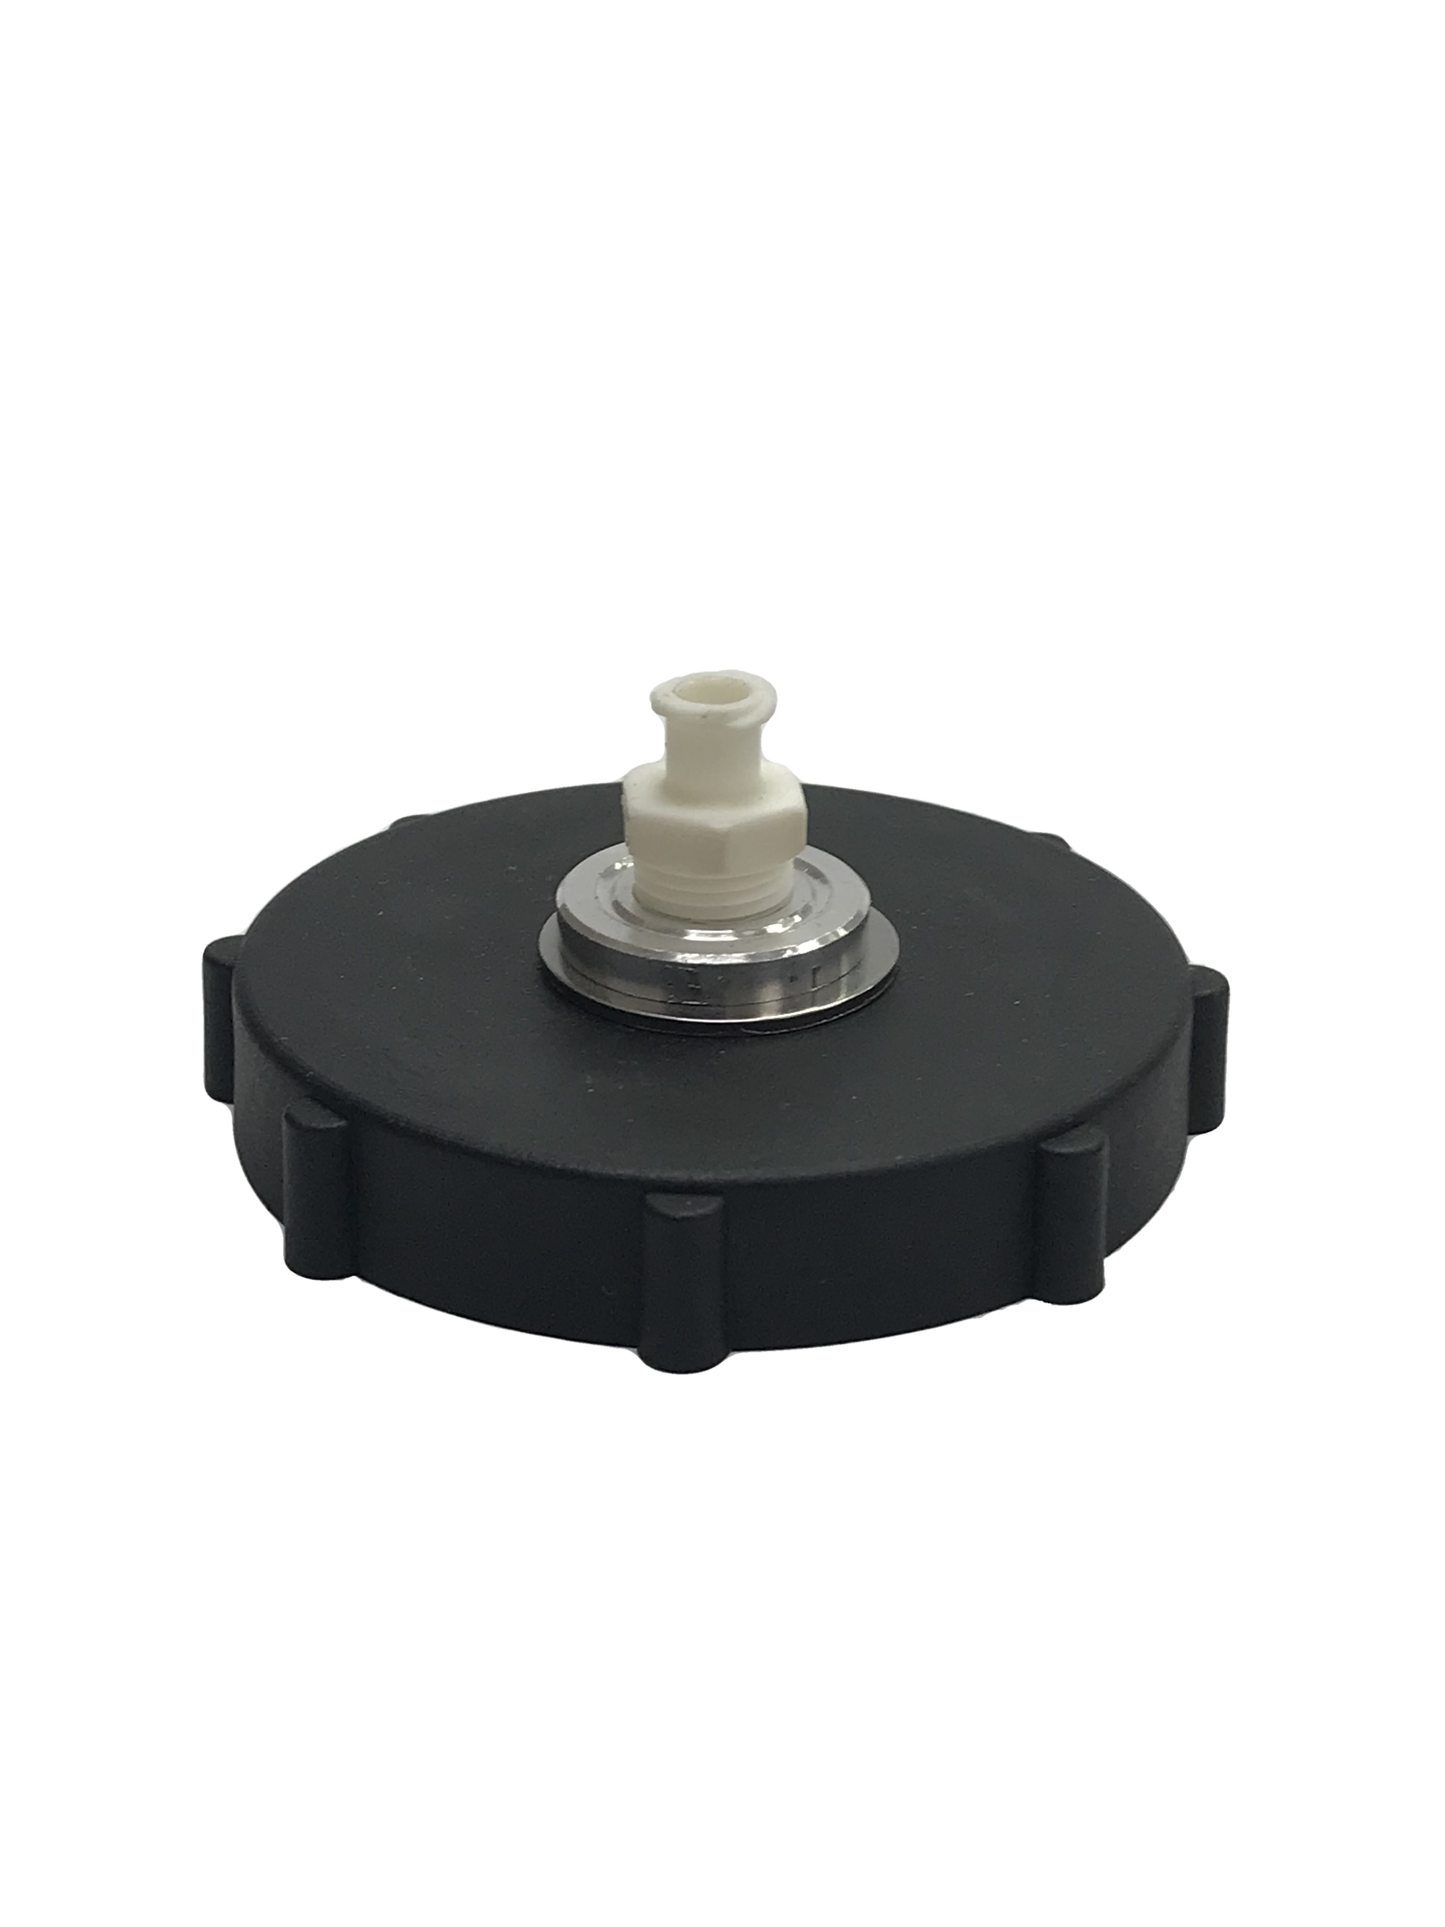 a BC-42 Master Cylinder Cap Adapter- GM 2013+ which is a black cap with a white top. It is a specialty tool used to convert a standard cap into a master cylinder cap on certain General Motors vehicles from 2013 onwards.